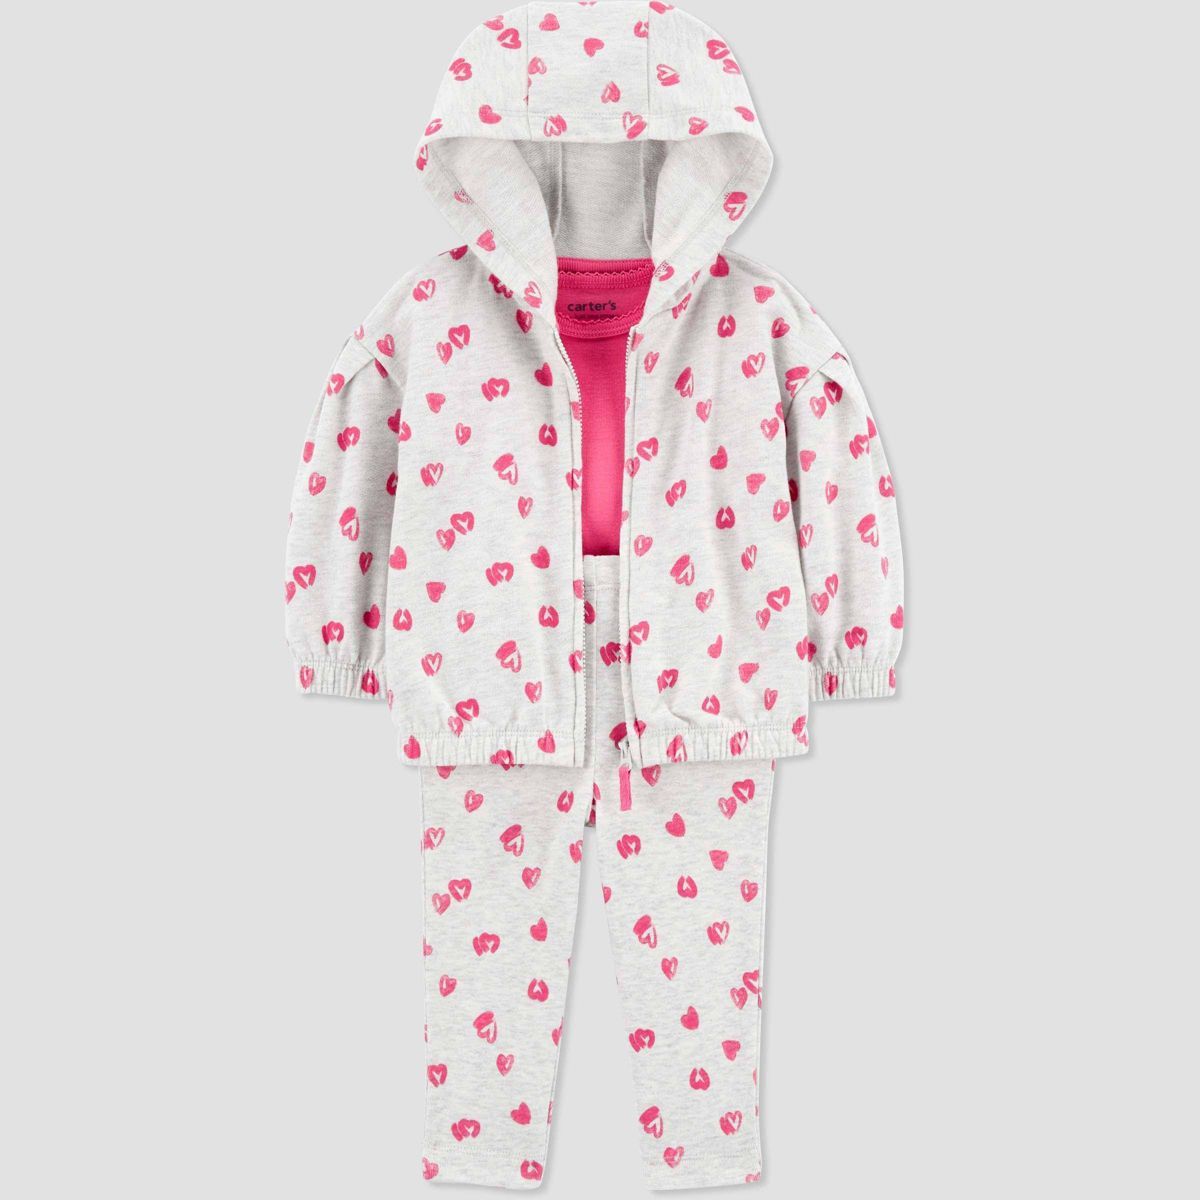 Carter's Just One You® Baby Girls' Hearts Top & Bottom Set - Pink | Target